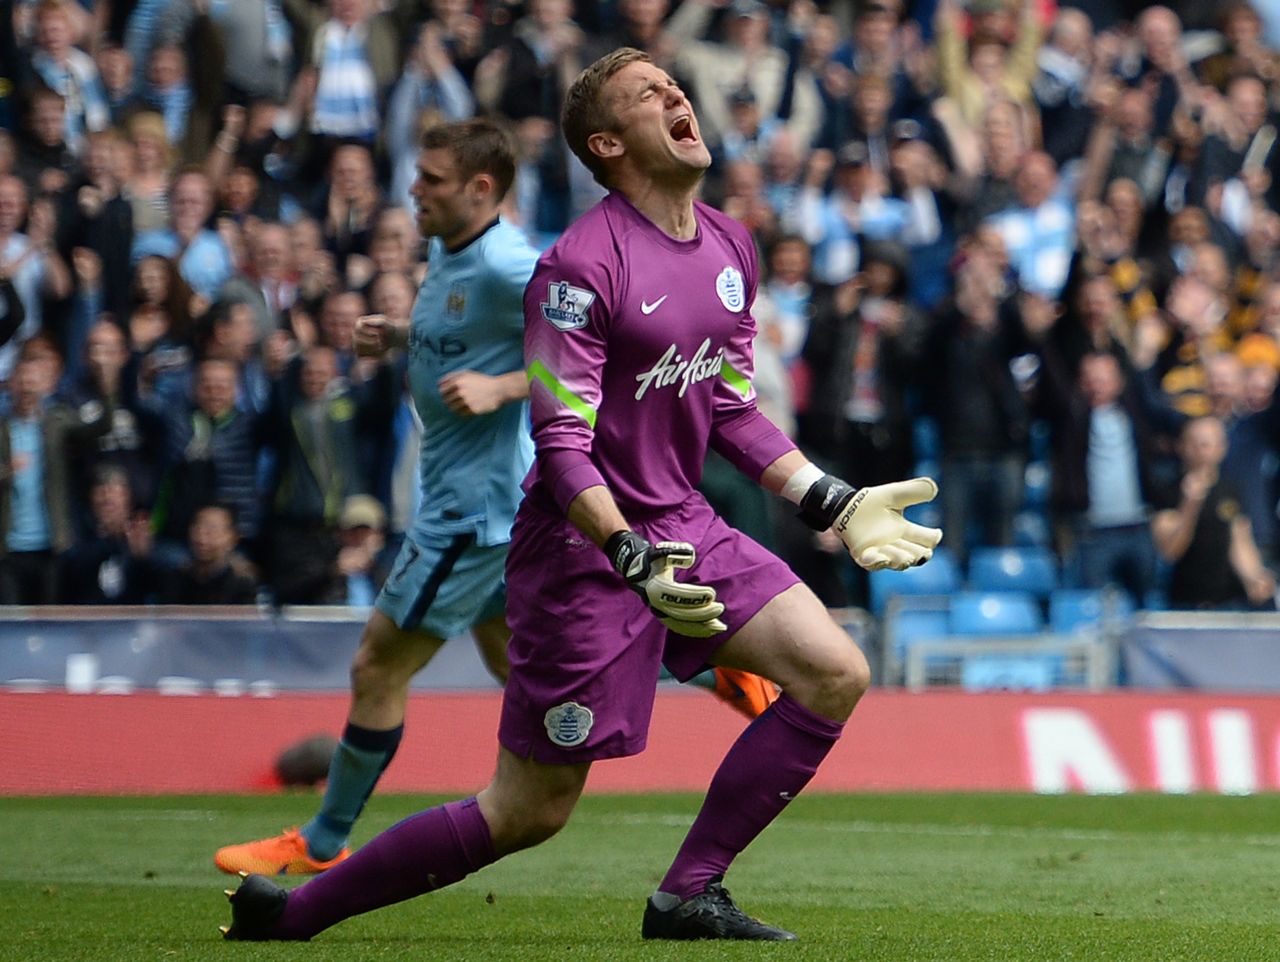 Six goals are too much to bear for QPR goalkeeper Robert Green as his side are relegated from the Premier League.